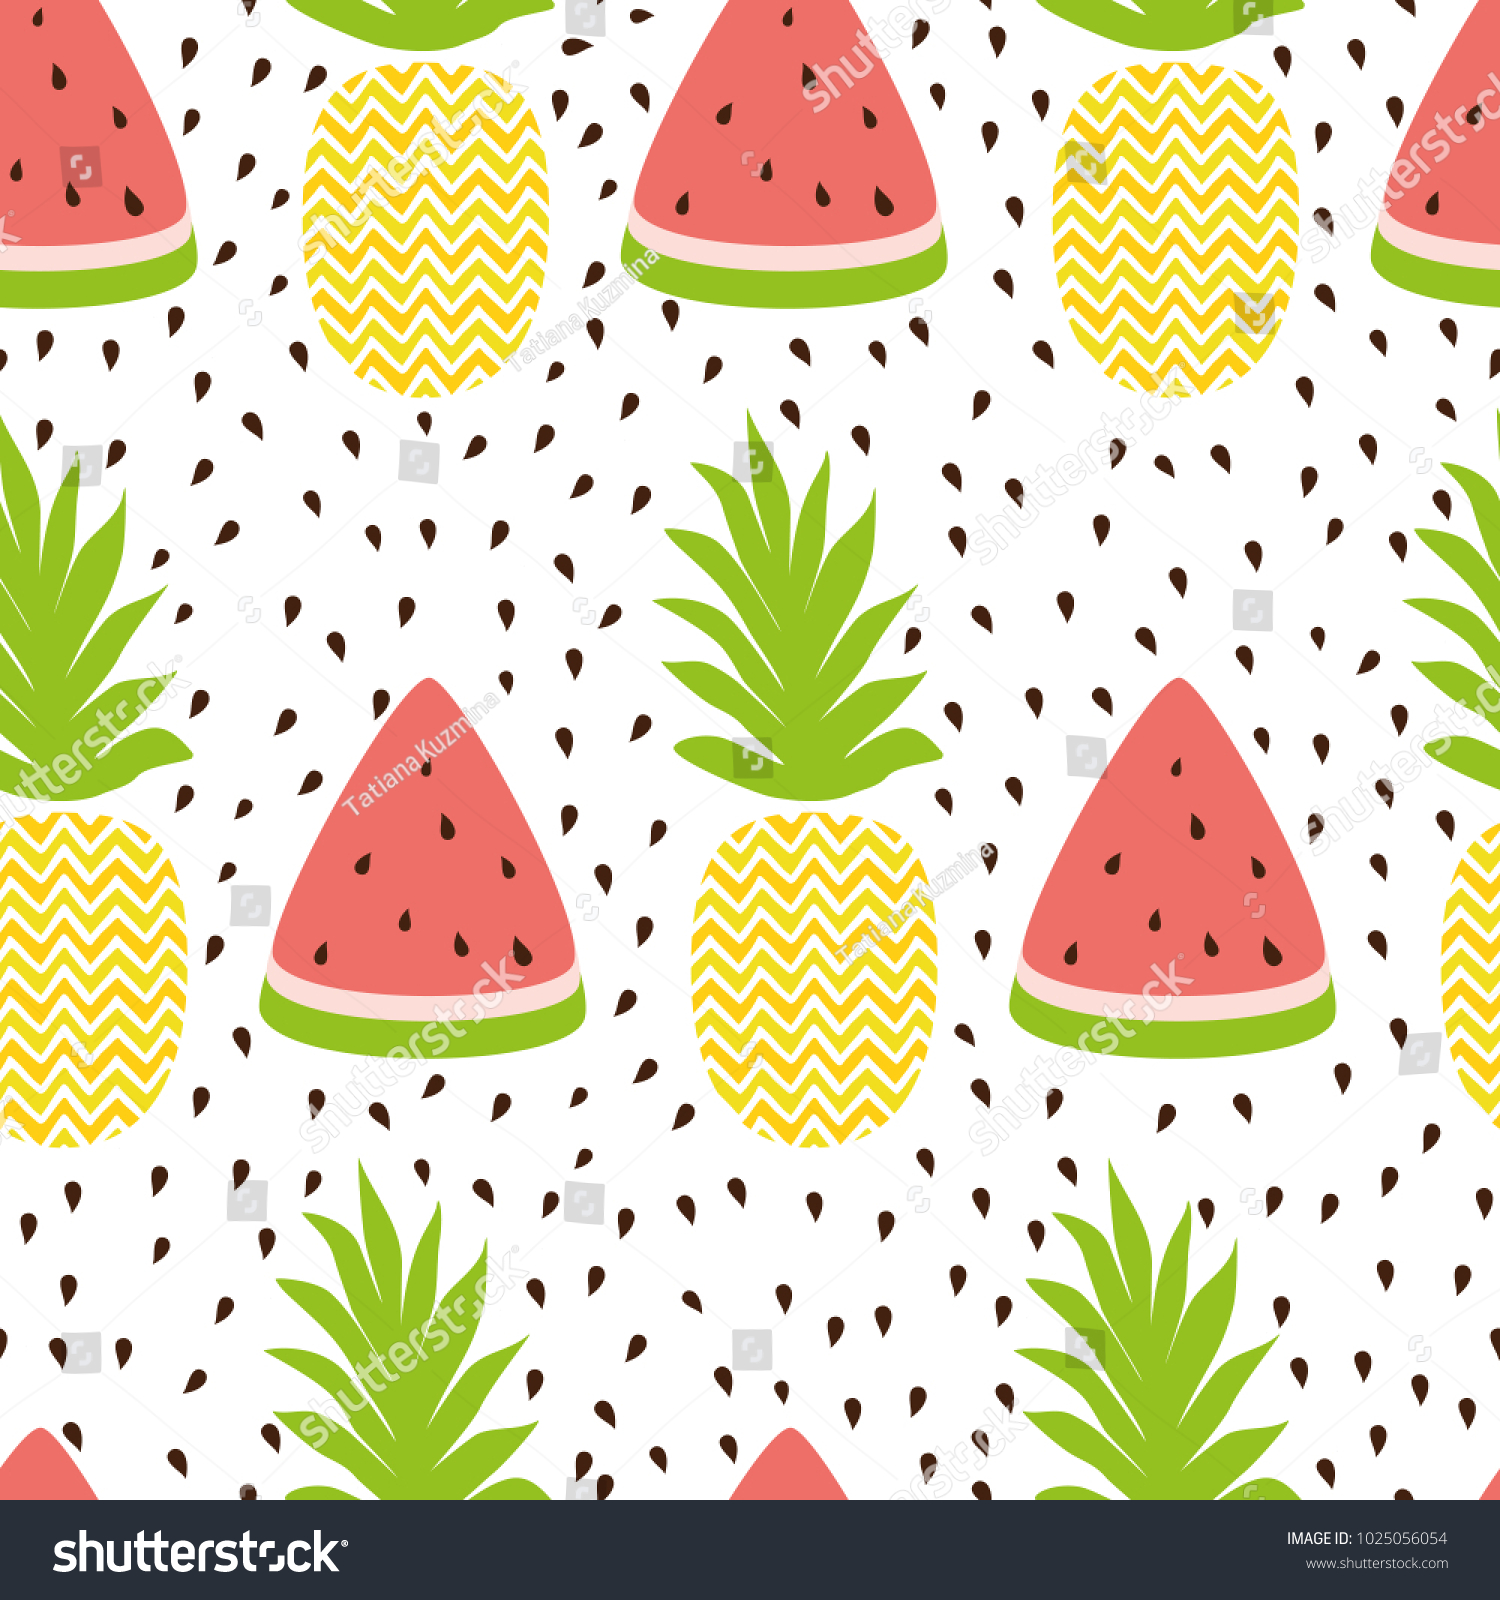 Pineapple And Watermelon Wallpaper